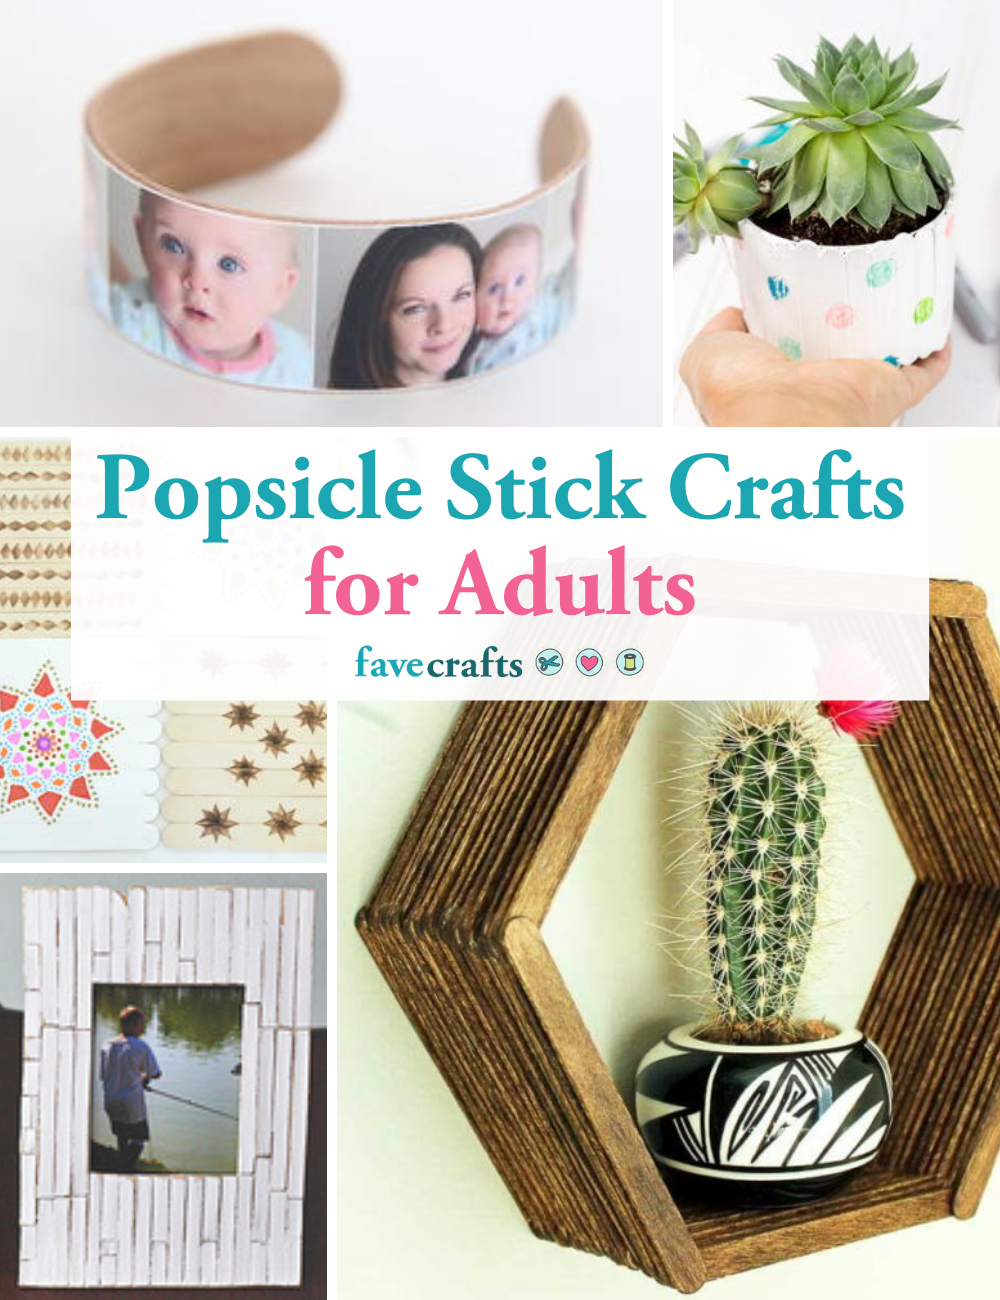 How To Make A Small Decorative Shelf Out Of Popsicle Sticks